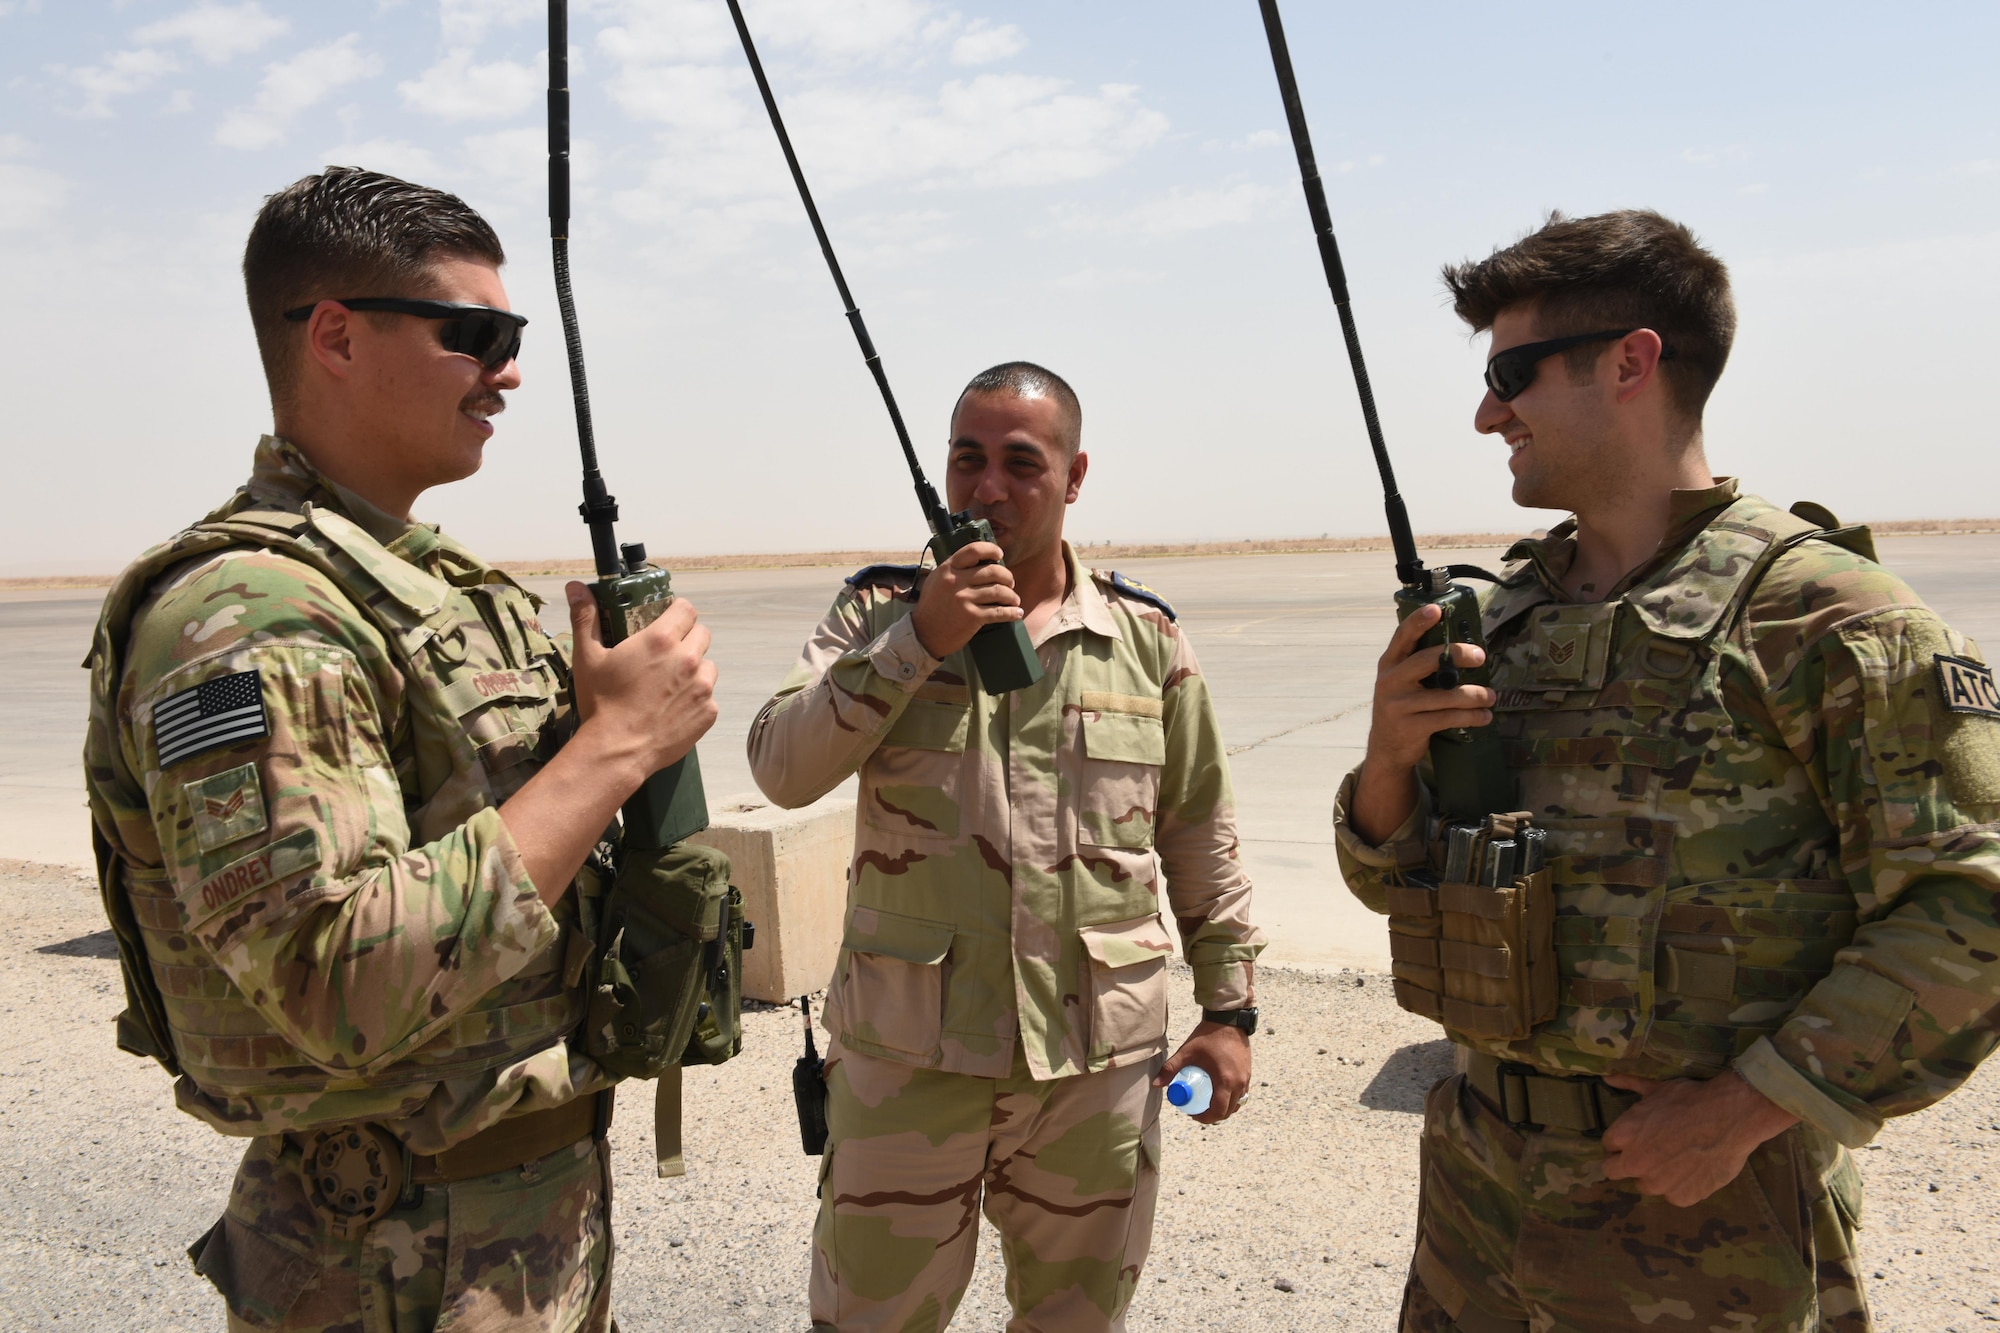 U.S. Air Force Senior Airman Troy Ondrey (left) and Staff Sgt. Matthew Ramos (right), both air traffic controllers deployed in support of Combined Joint Task Force – Operation Inherent Resolve and assigned to the 370th Air Expeditionary Advisory Group, Detachment 1, work with an Iraqi air force air traffic controller to coordinate the arrival of an incoming aircraft at Qayyarah West Airfield, Iraq, July 1, 2017. To ensure seamless control of both Iraqi and coalition air traffic, the U.S. Air Force’s 370th AEAG supports the CJTF-OIR advise and assist mission by having a small team of air advisors at Qayyarah West airfield working alongside the Iraqis advising and assisting in day-to-day airfield operations. CJTF-OIR is the global Coalition to defeat ISIS in Iraq and Syria. (U.S. Air Force photo by Tech. Sgt. Jonathan Hehnly)